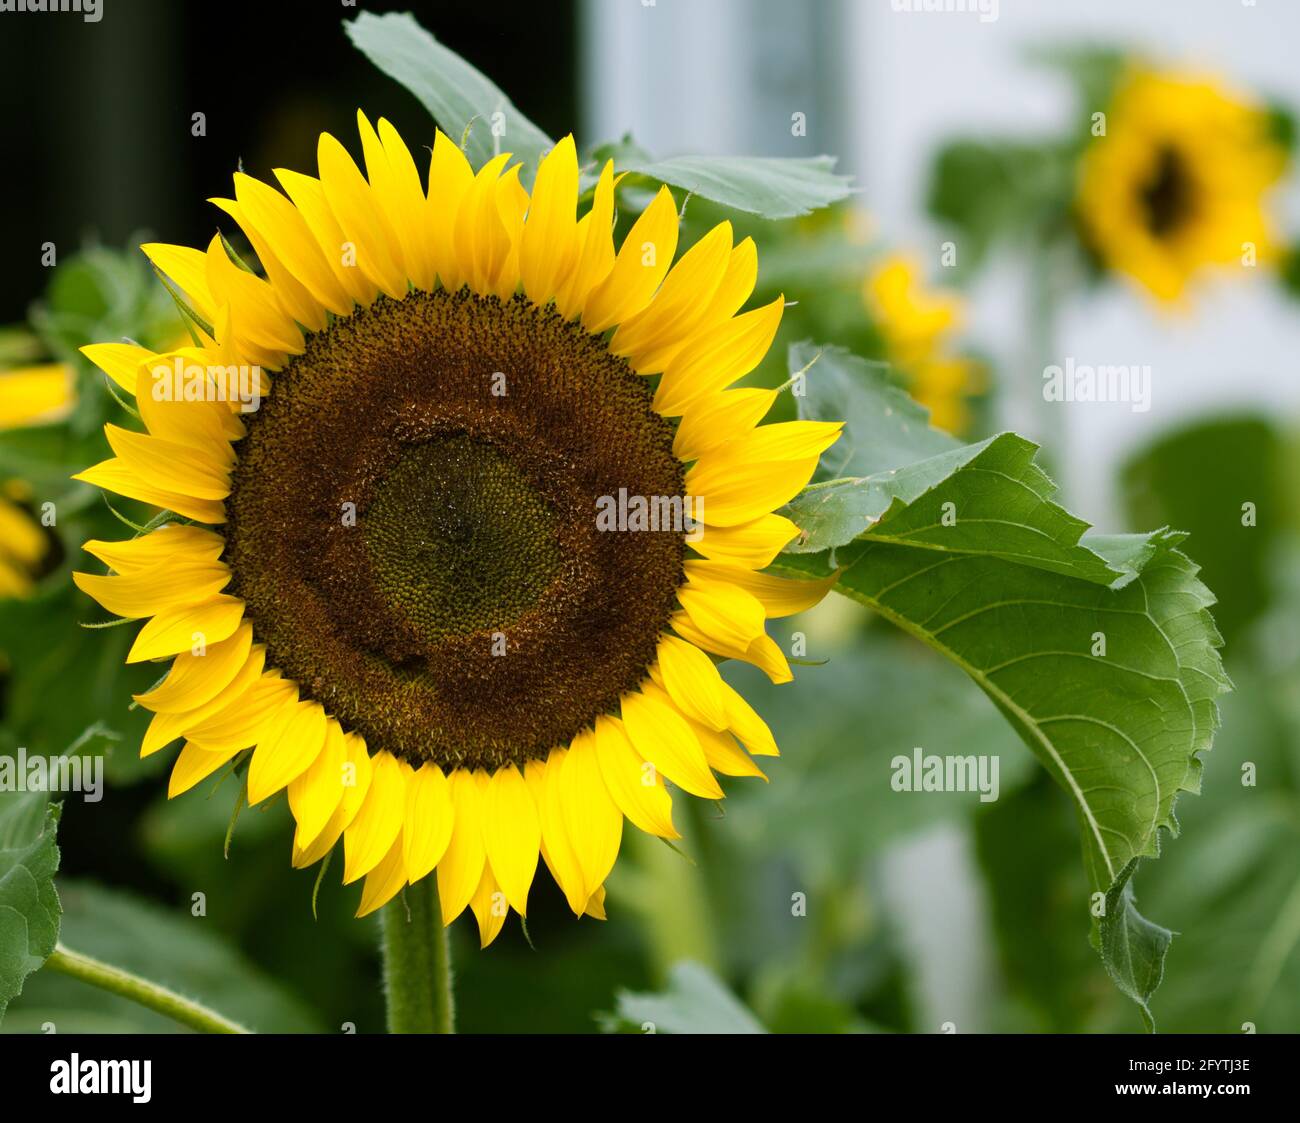 Sunflowers decorated the garden at FLORIA 2012 event held in Putrajaya, Malaysia. Stock Photo